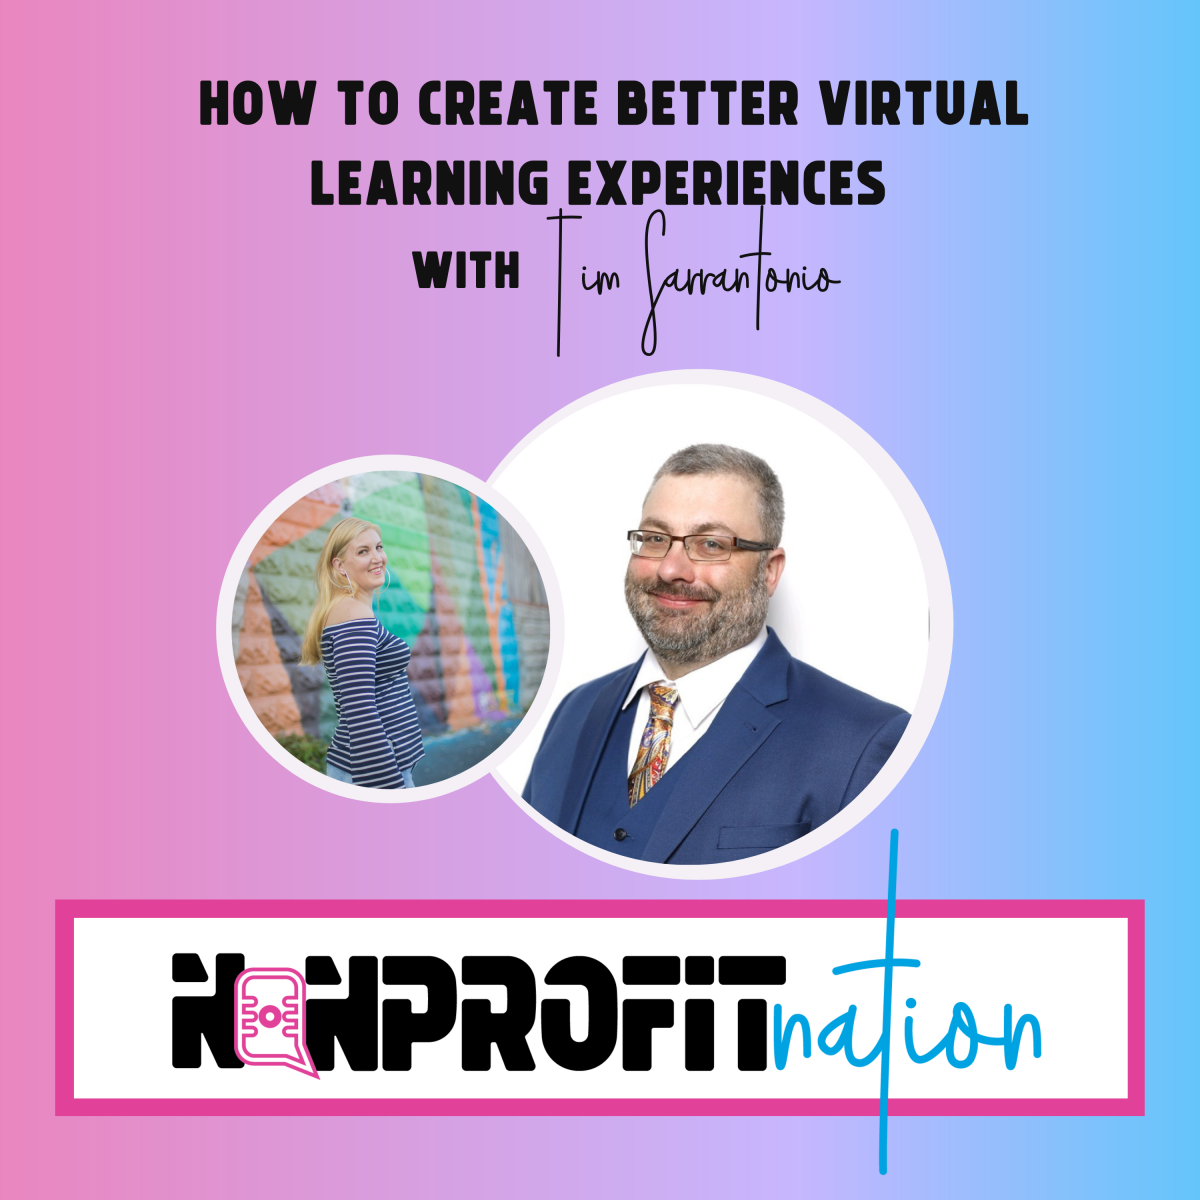 How to Create Better Virtual Learning Experiences with Tim Sarrantonio